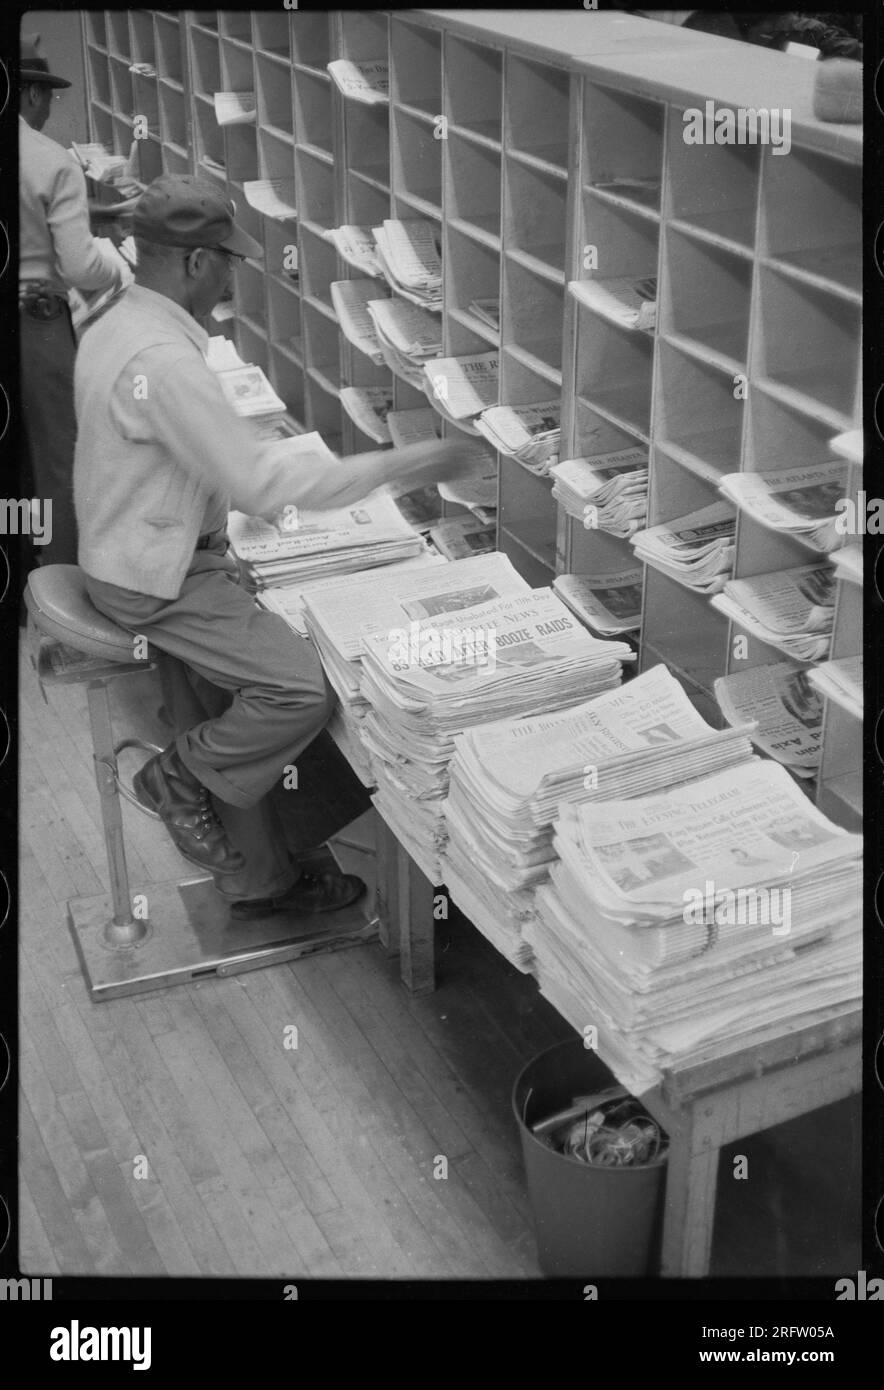 Workers sorting mail at the United States Post Office in New York City, NY in 1957. Stock Photo